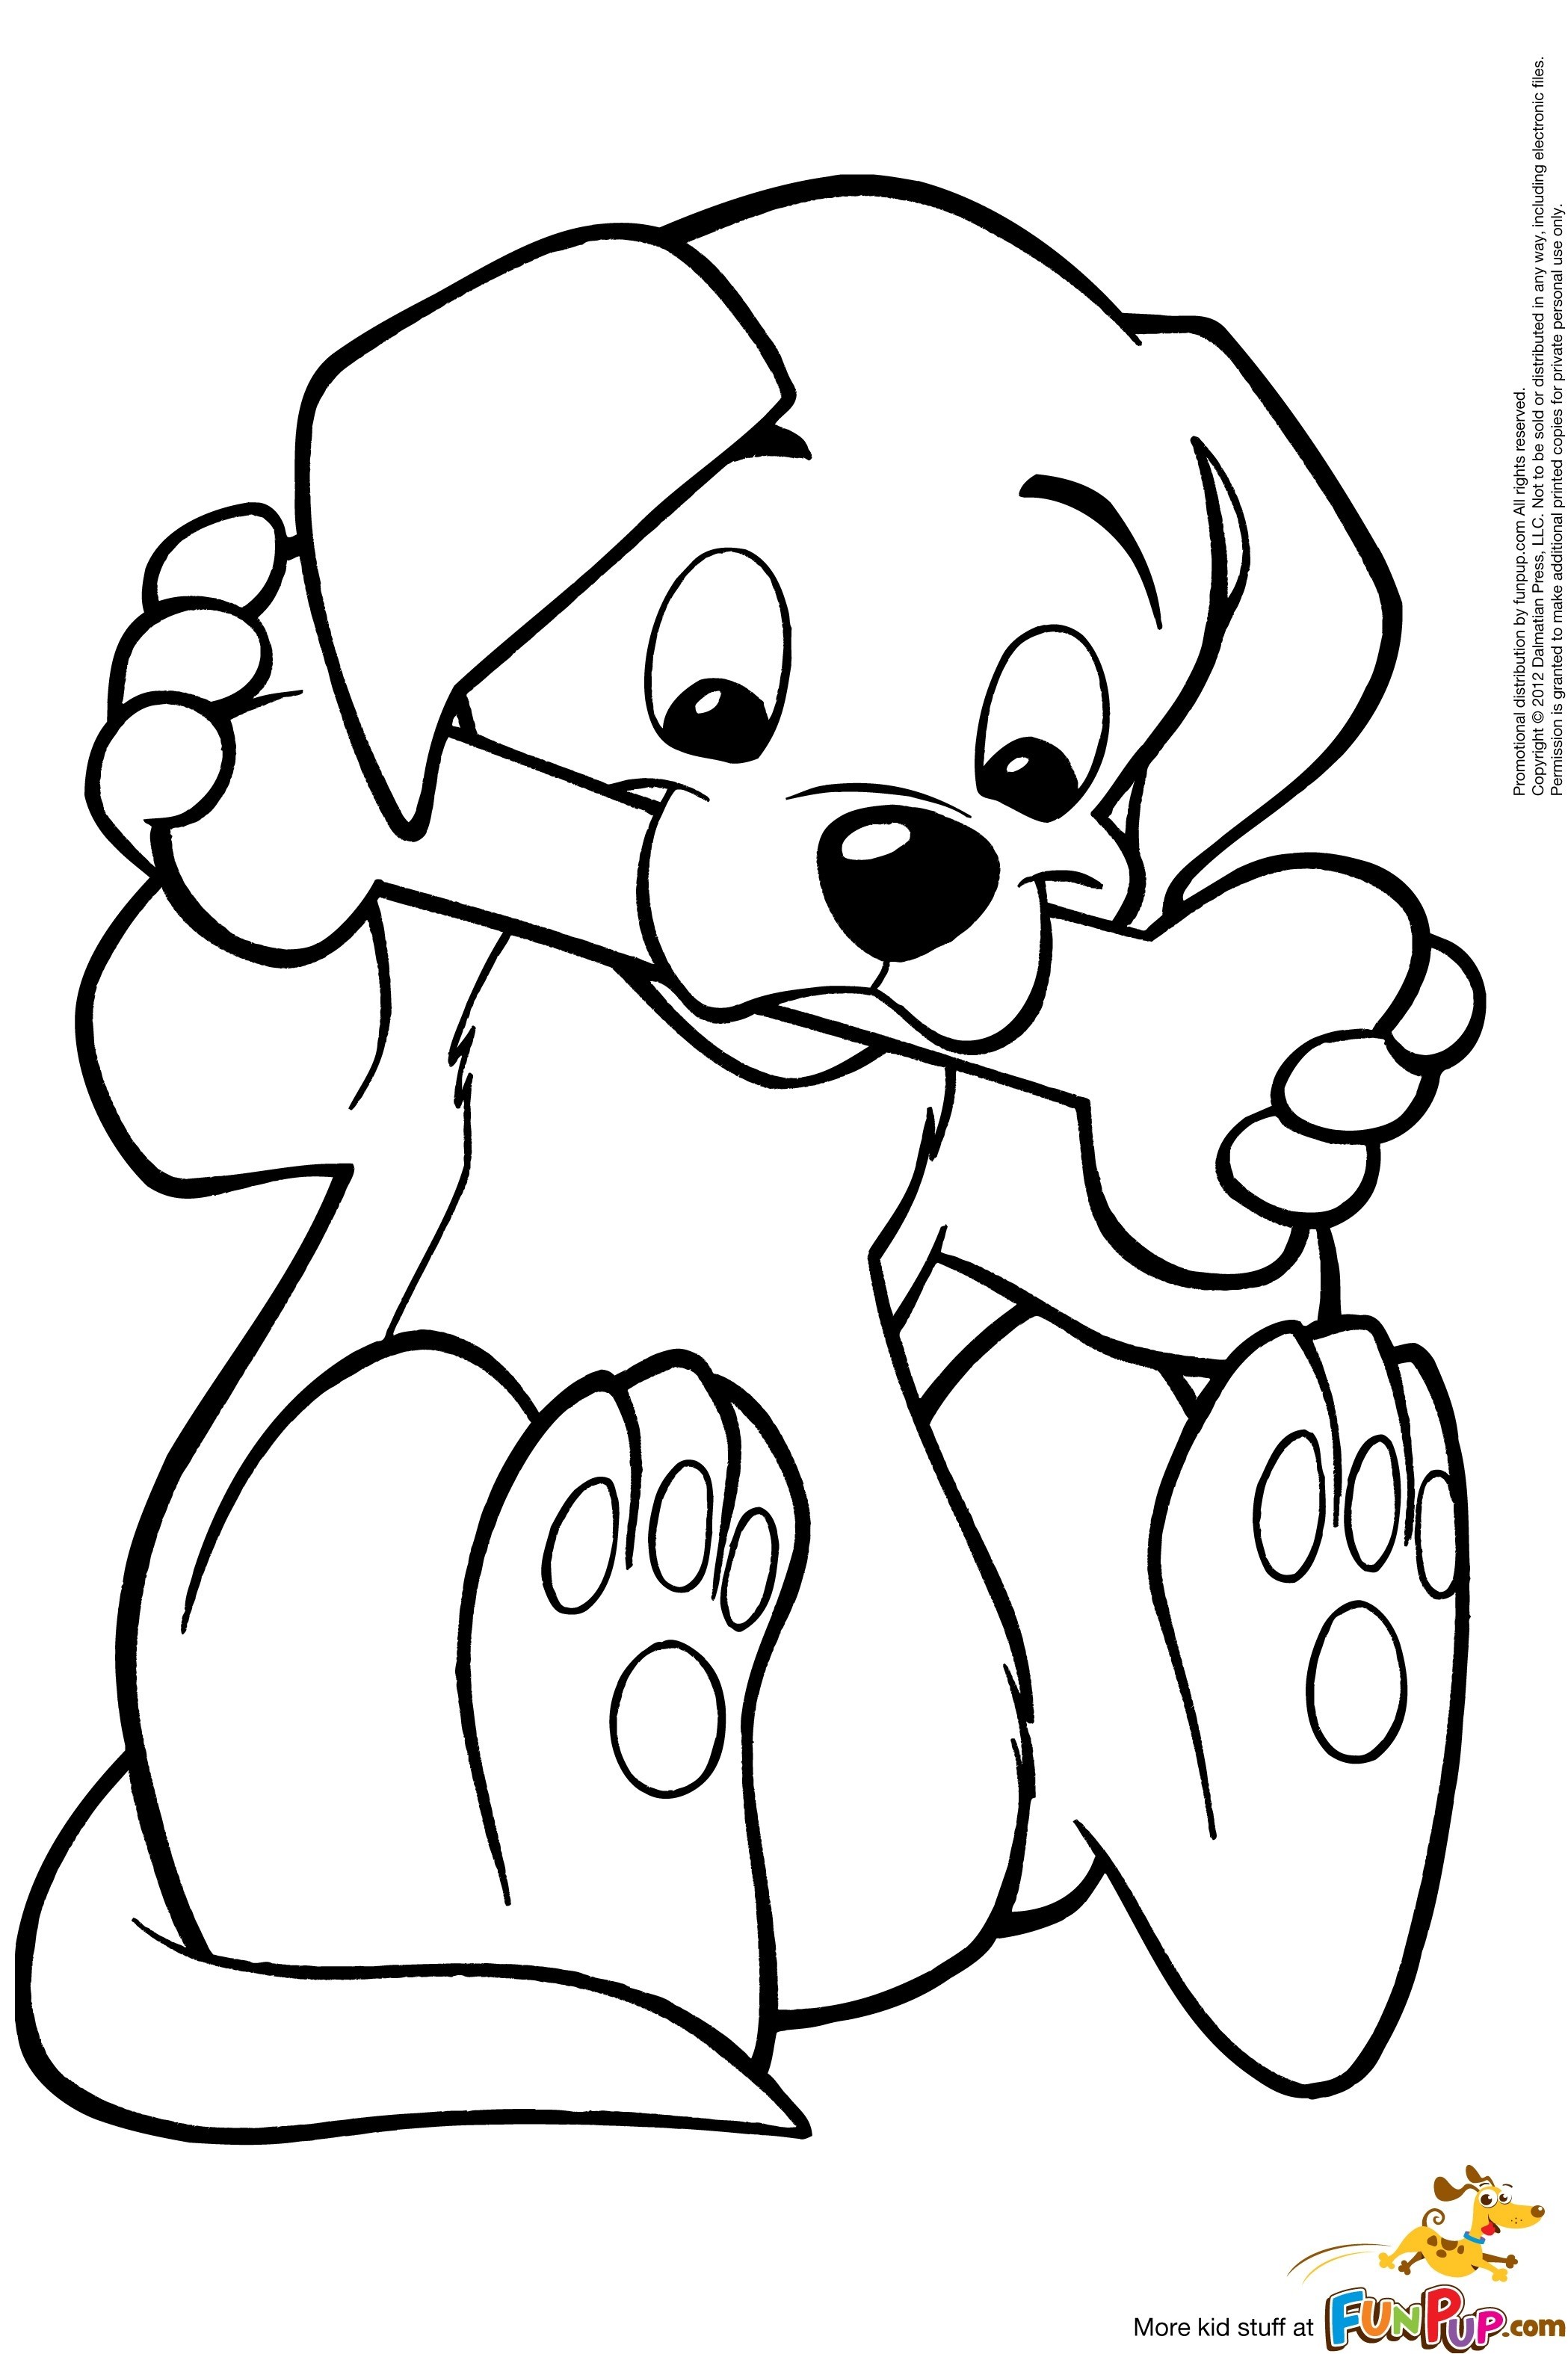 dog pictures to color free free printable dog coloring pages for kids to pictures free color dog 